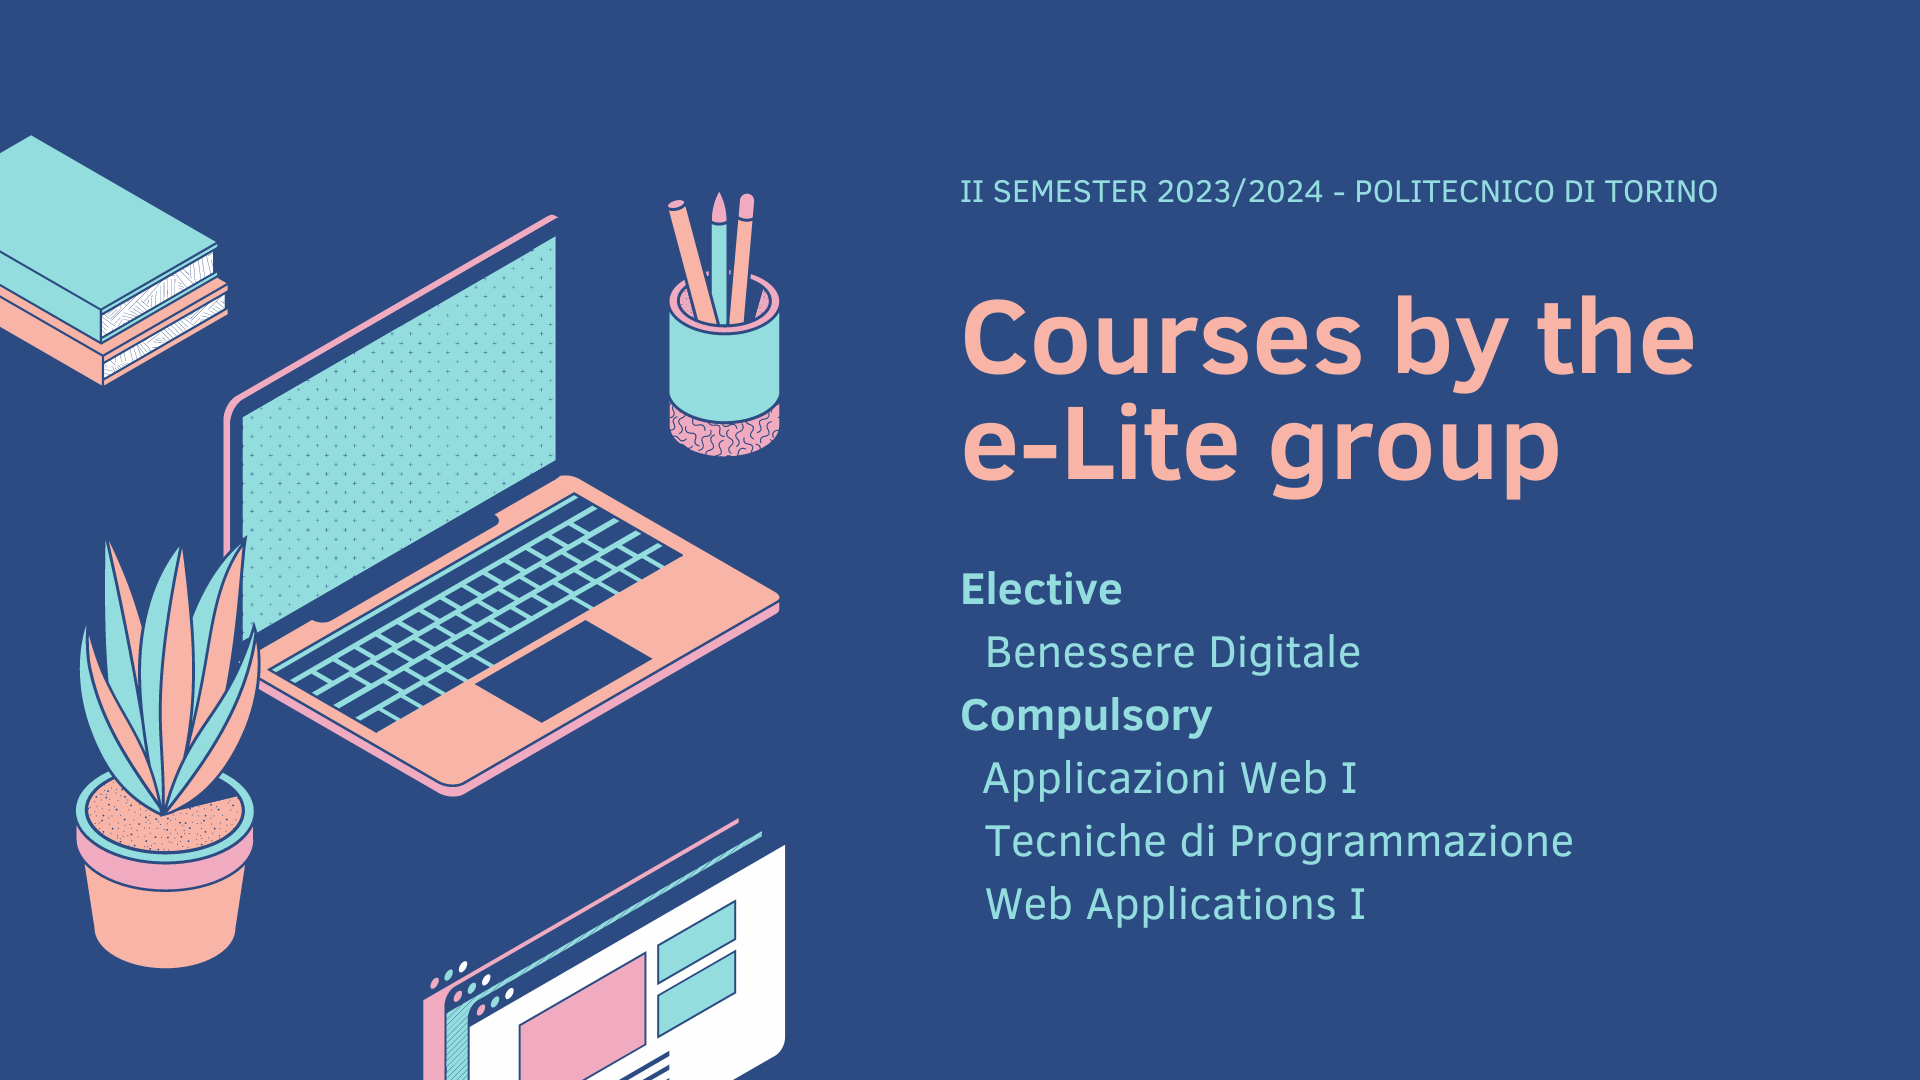 e-Lite courses in the first semester: introduction to web application, user experience design, human computer interaction, database, computer science